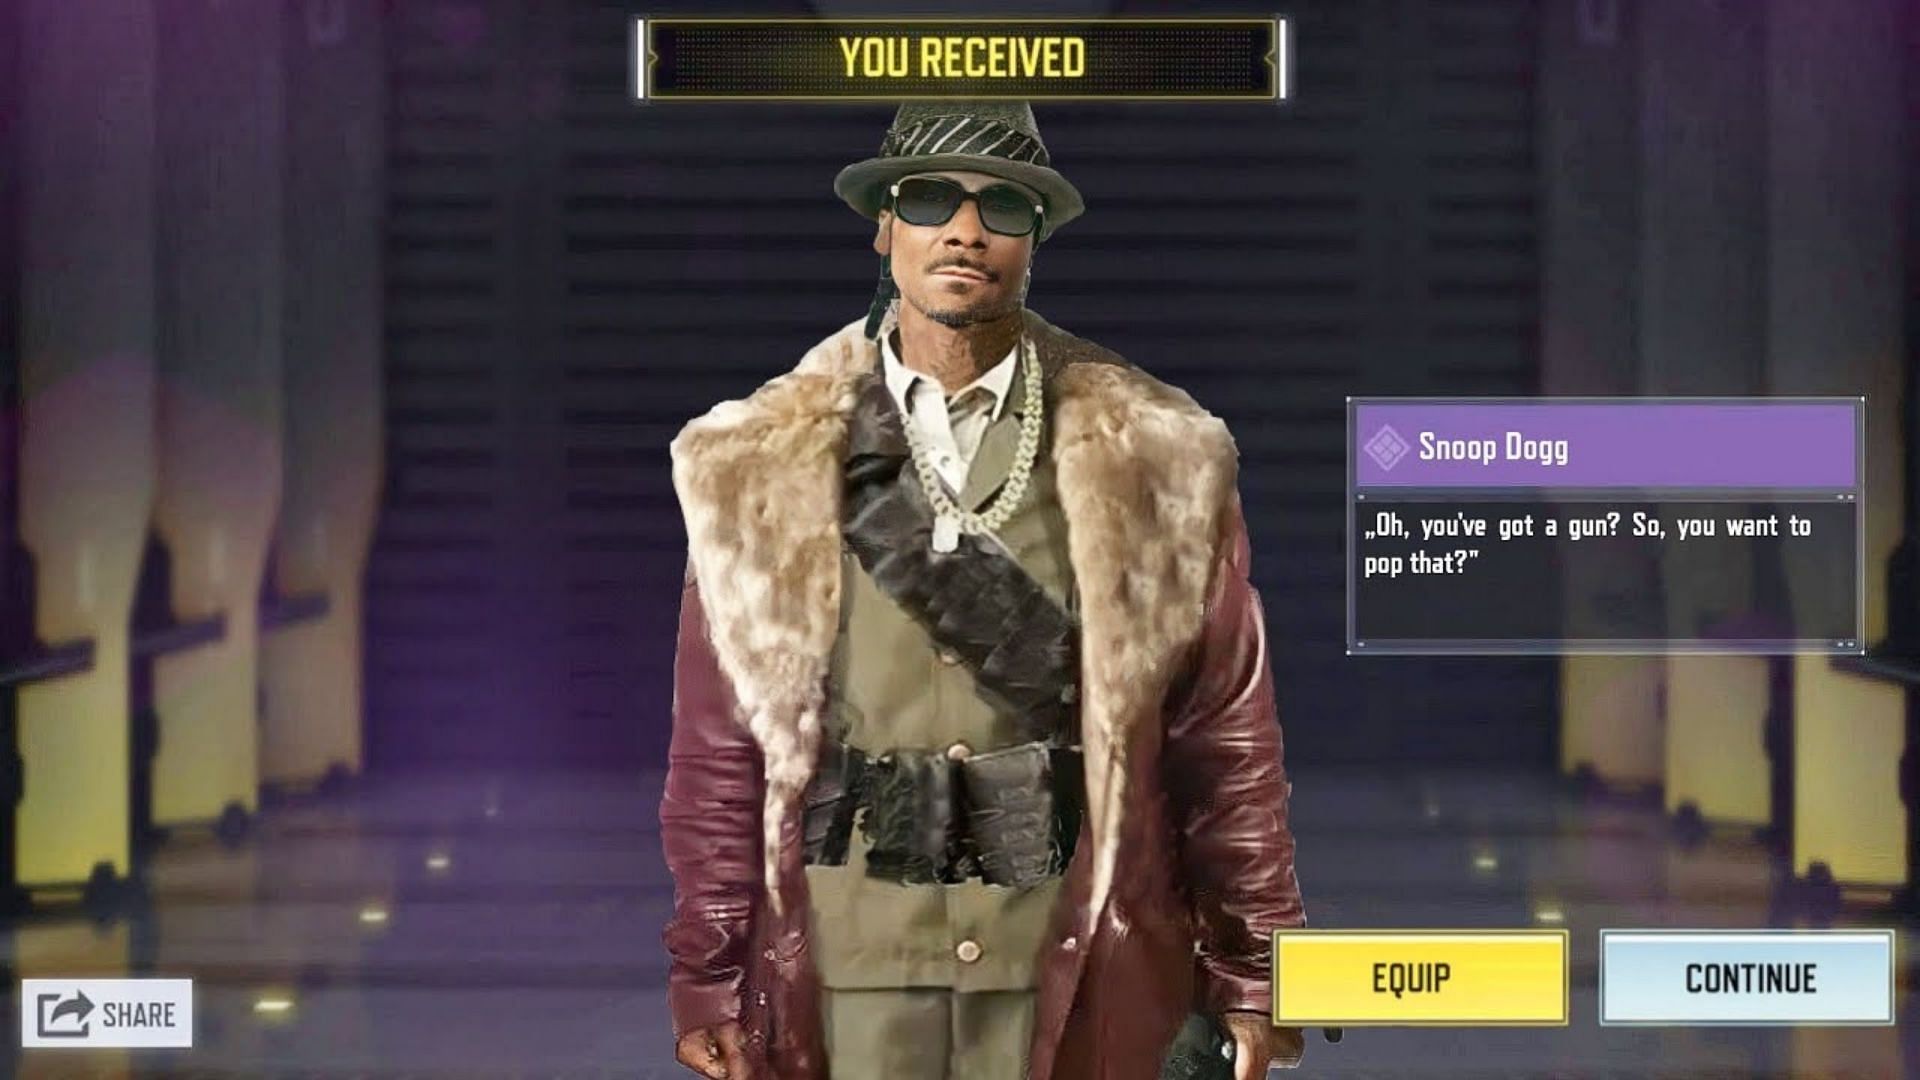 COD Mobile has confirmed a collaboration with Snoop Dogg and players can expect an operator skin based on the rapper next month (Image via Papa Joe/YouTube)